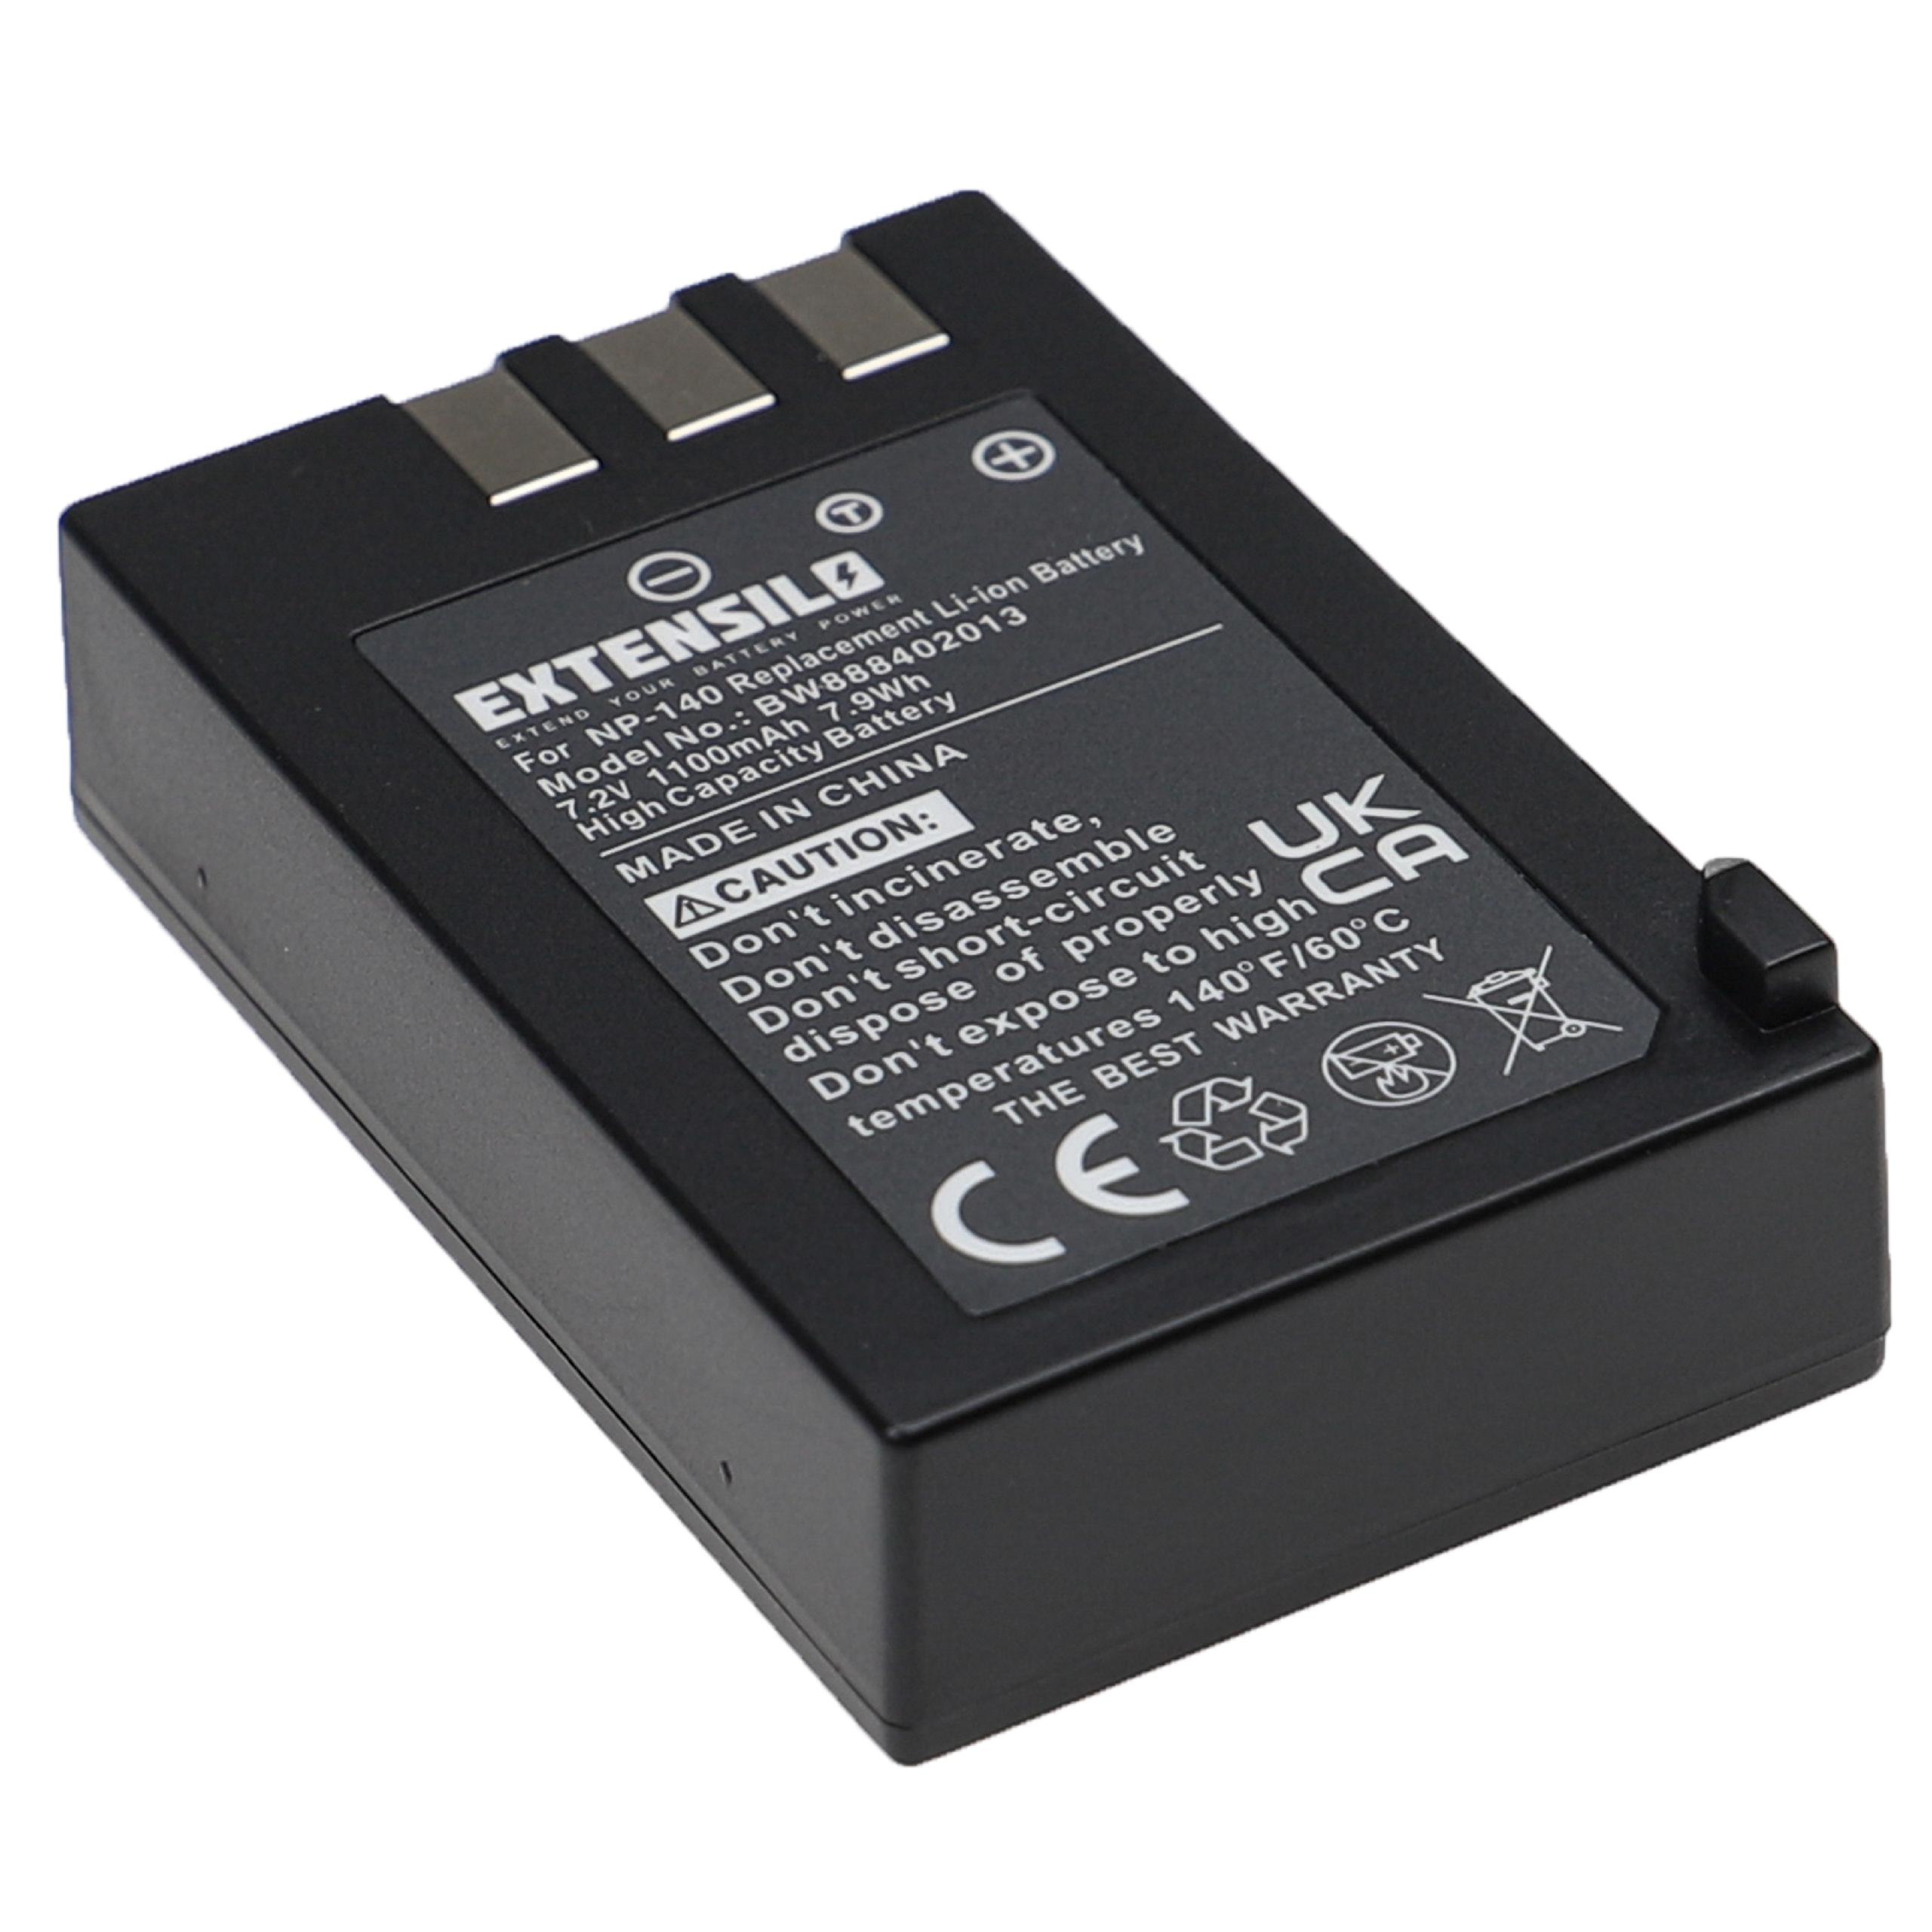 Battery Replacement for - 1100mAh, 7.2V, Li-Ion